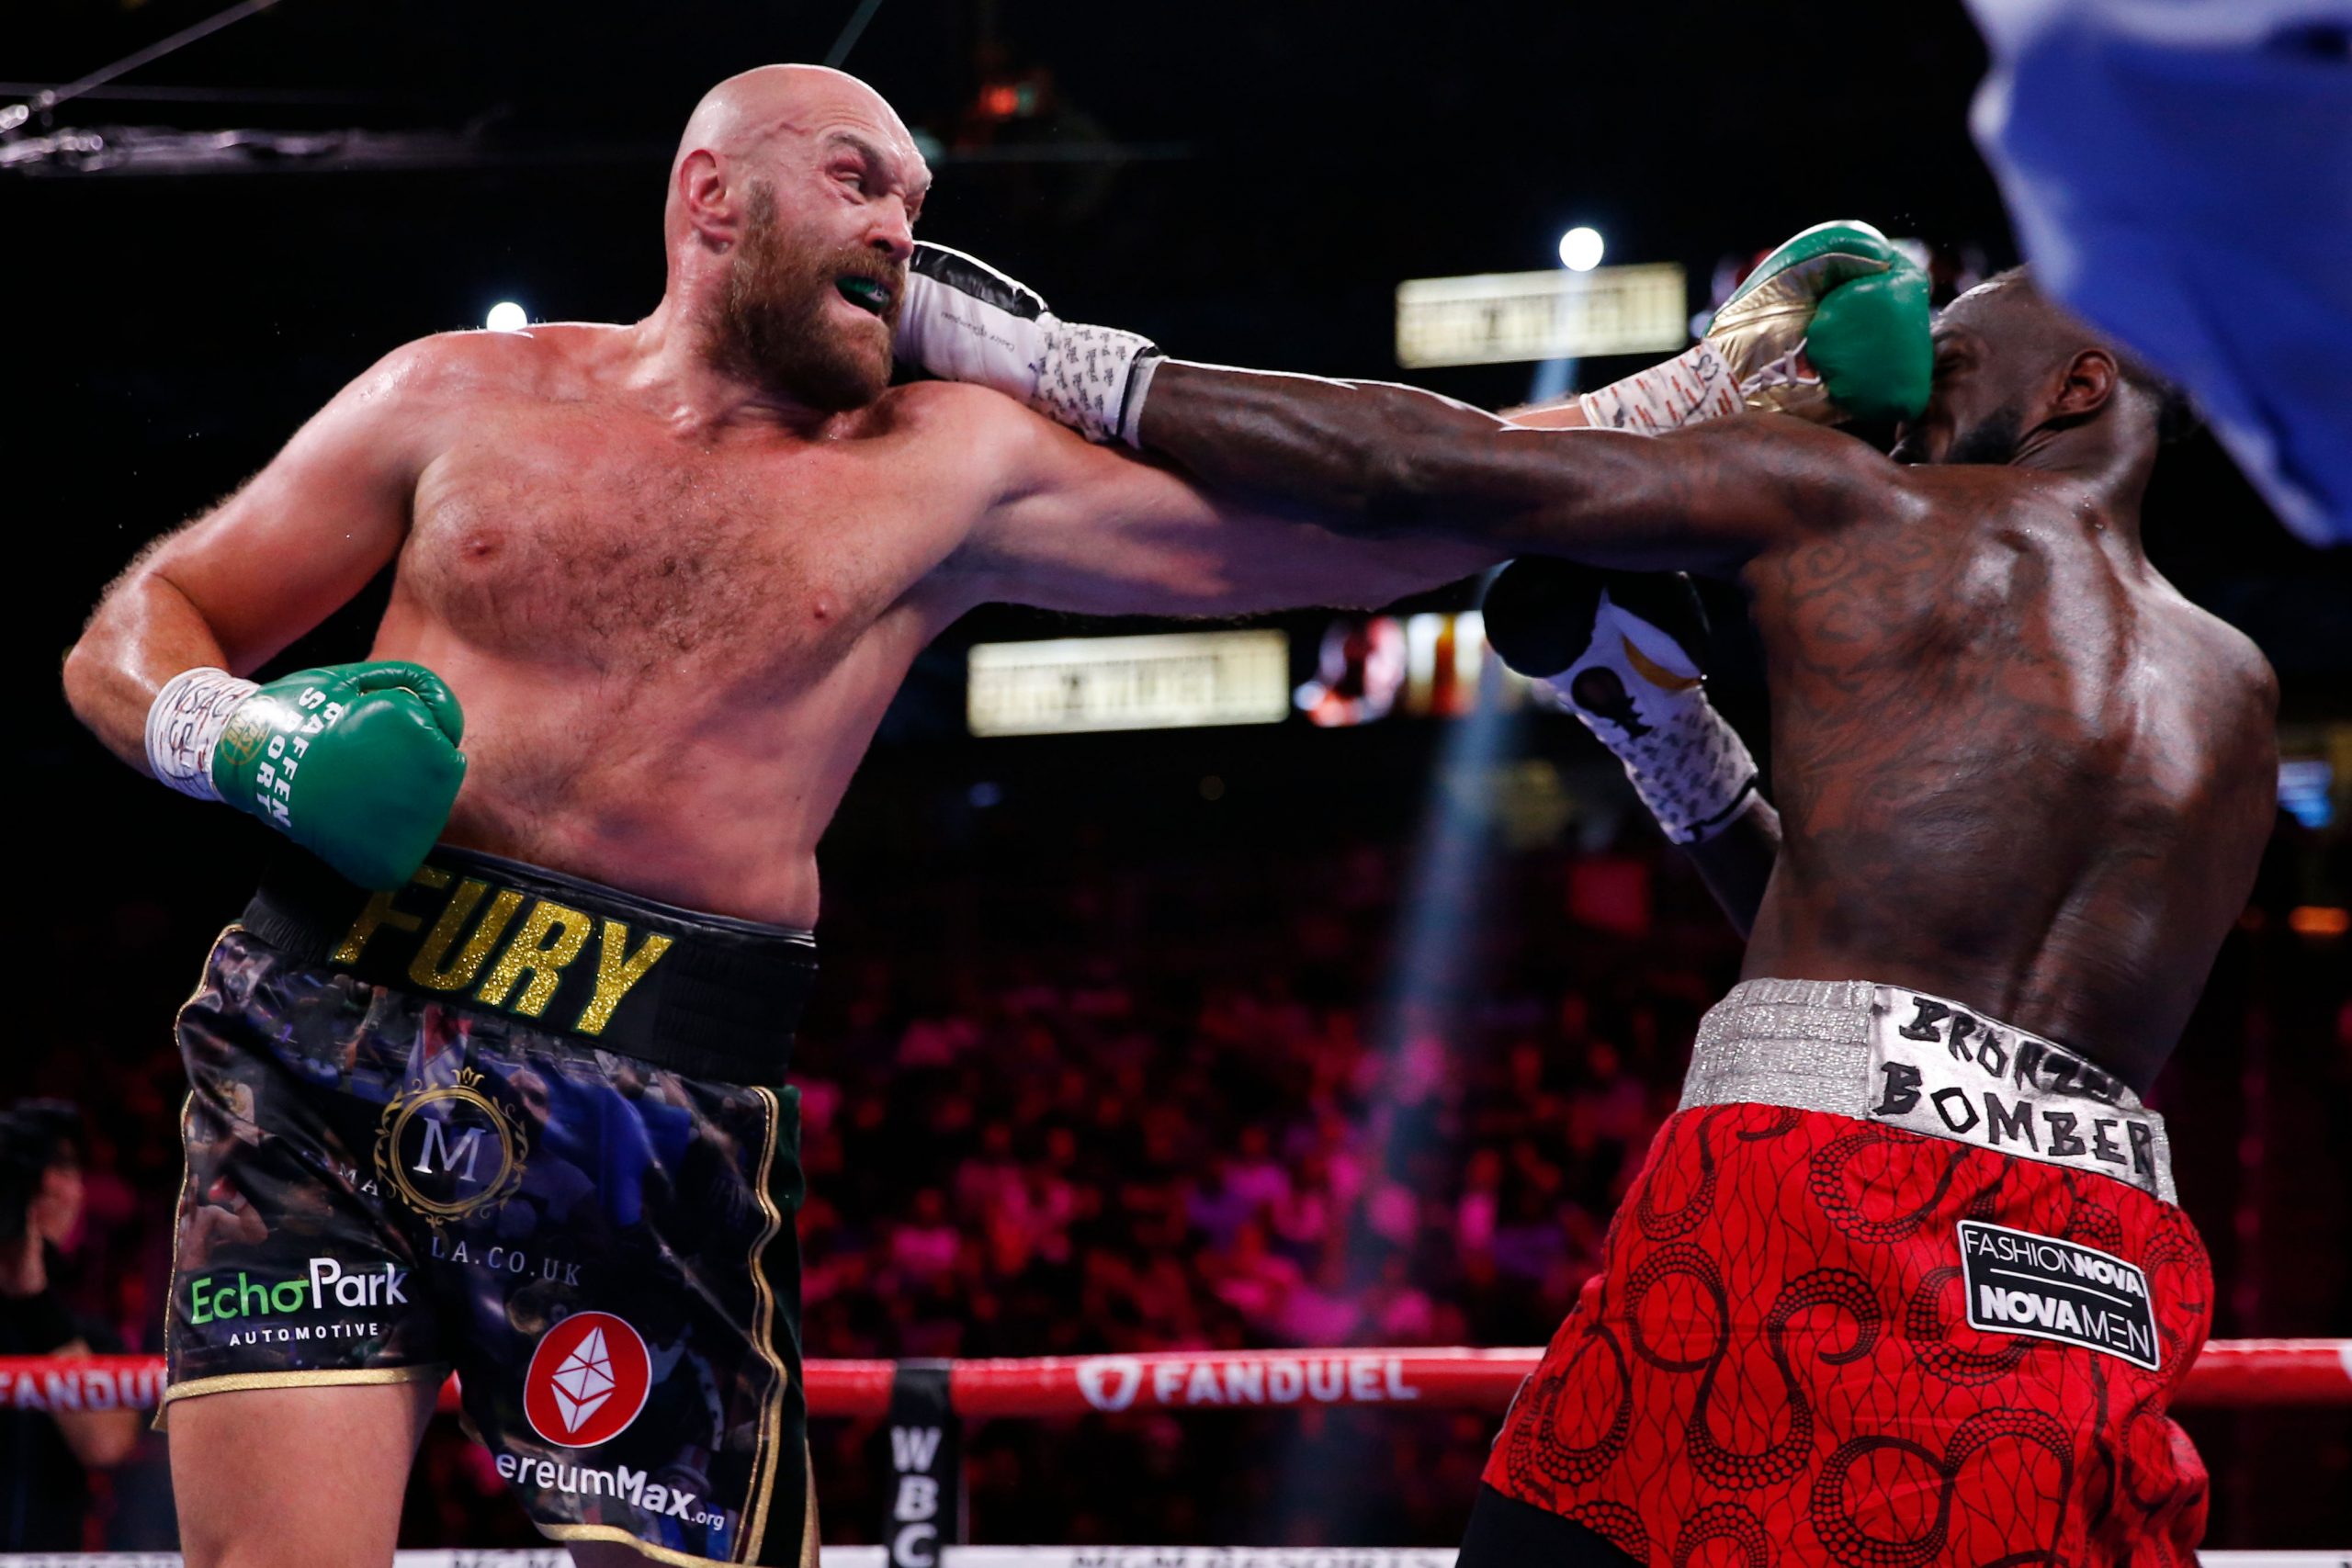 Tyson Fury vs Dillian Whyte set in UK, rights to title bout secured for $41 million